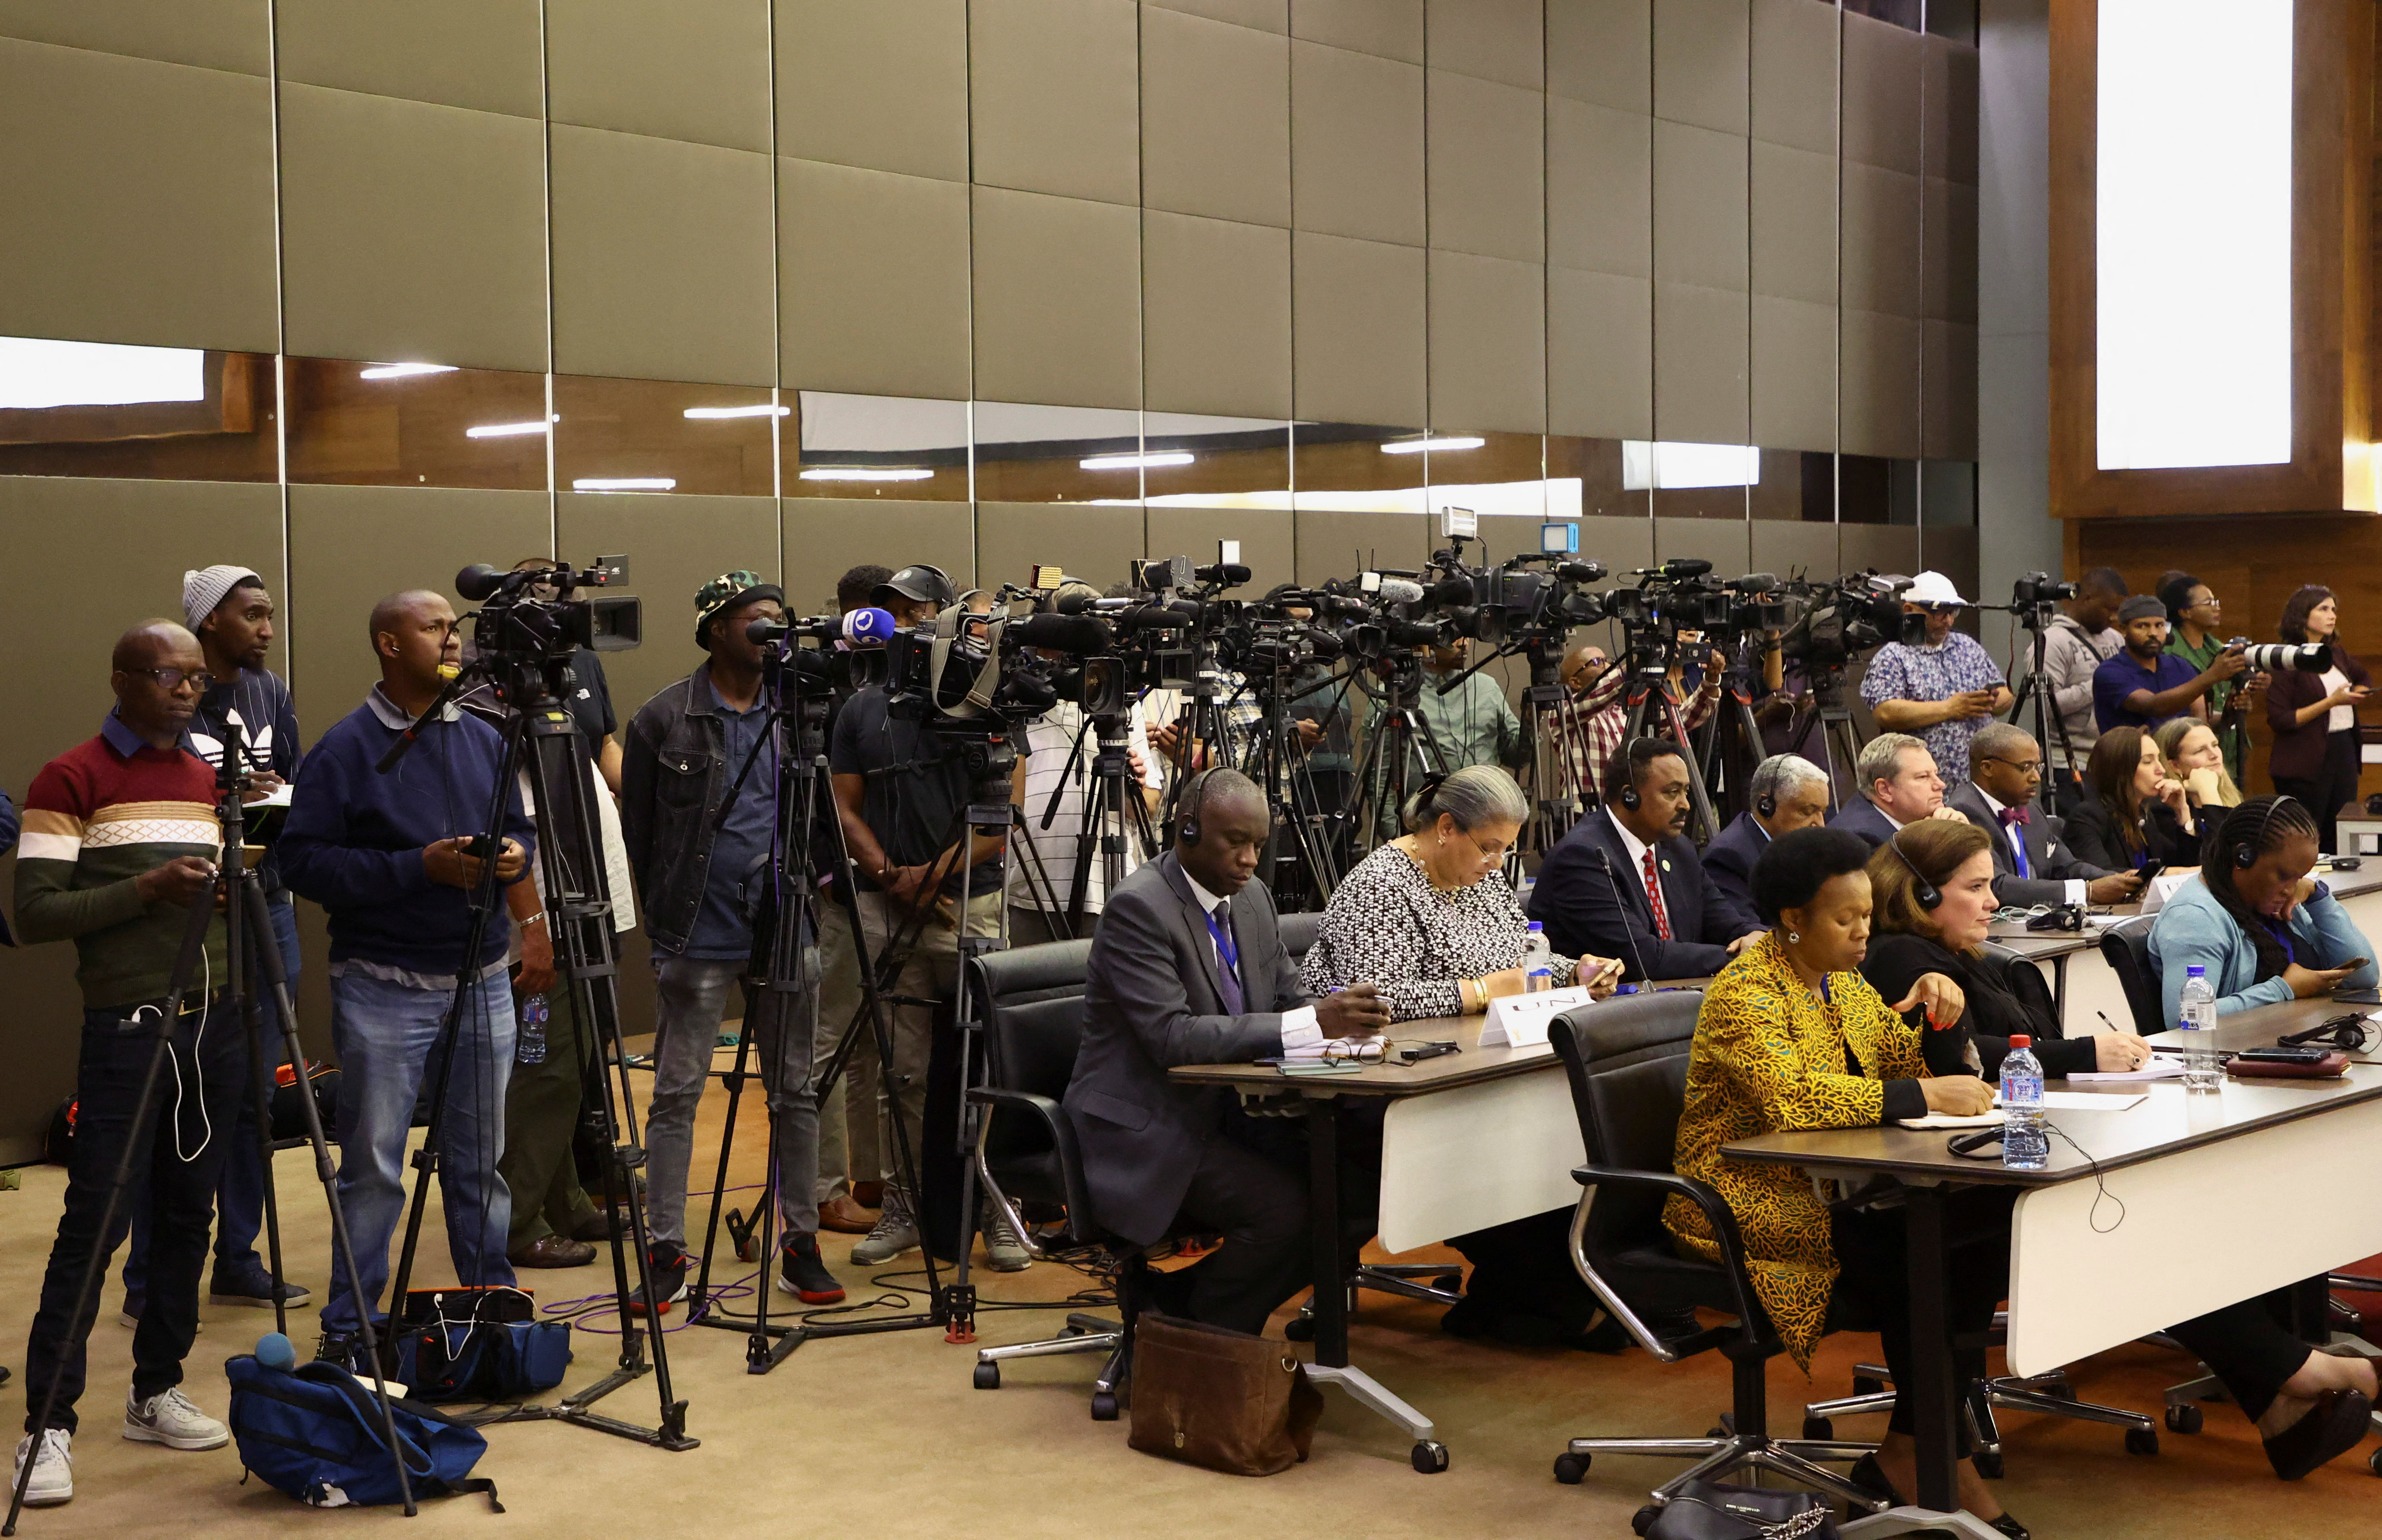 African Union envoy holds a news conference on Ethiopia peace talks